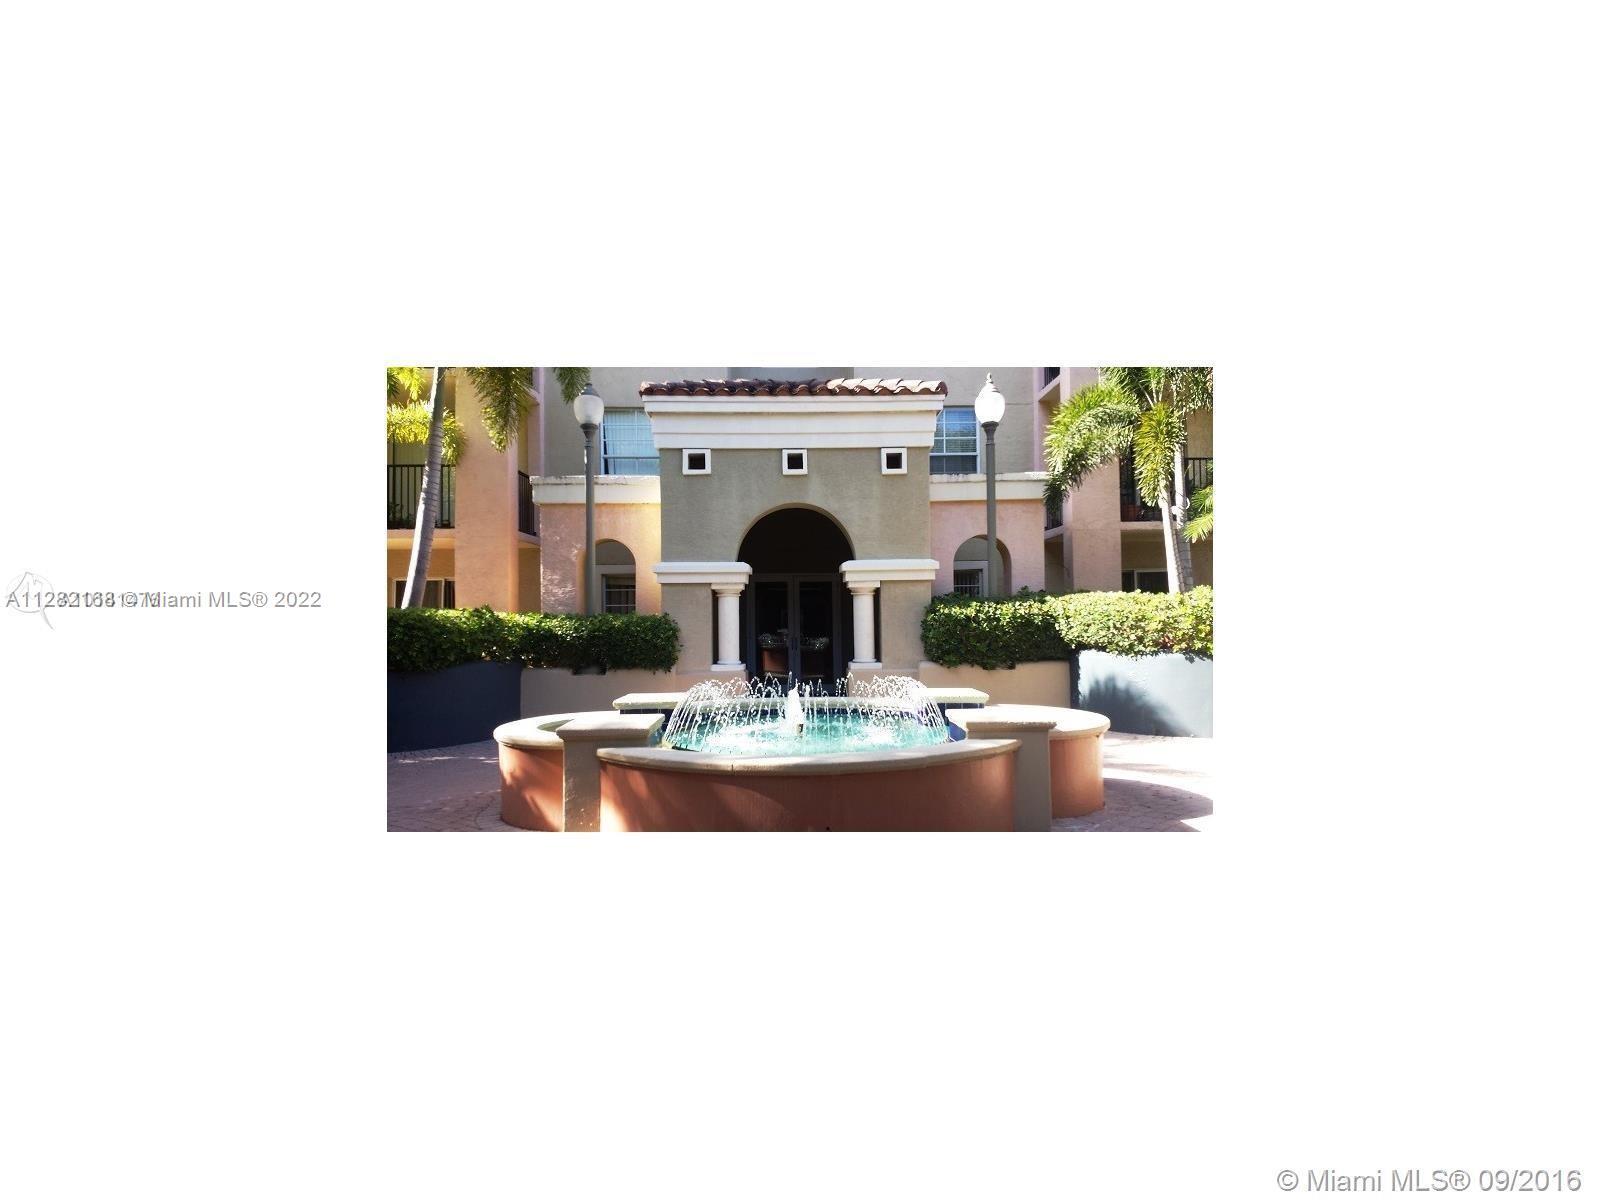 BRIGHT 2 BEDROOM 2 BATHROOM IN DESIRABLE LAS OLAS BY THE RIVER, UNIT FEATURES FOYER ENTRY, OPEN KITC